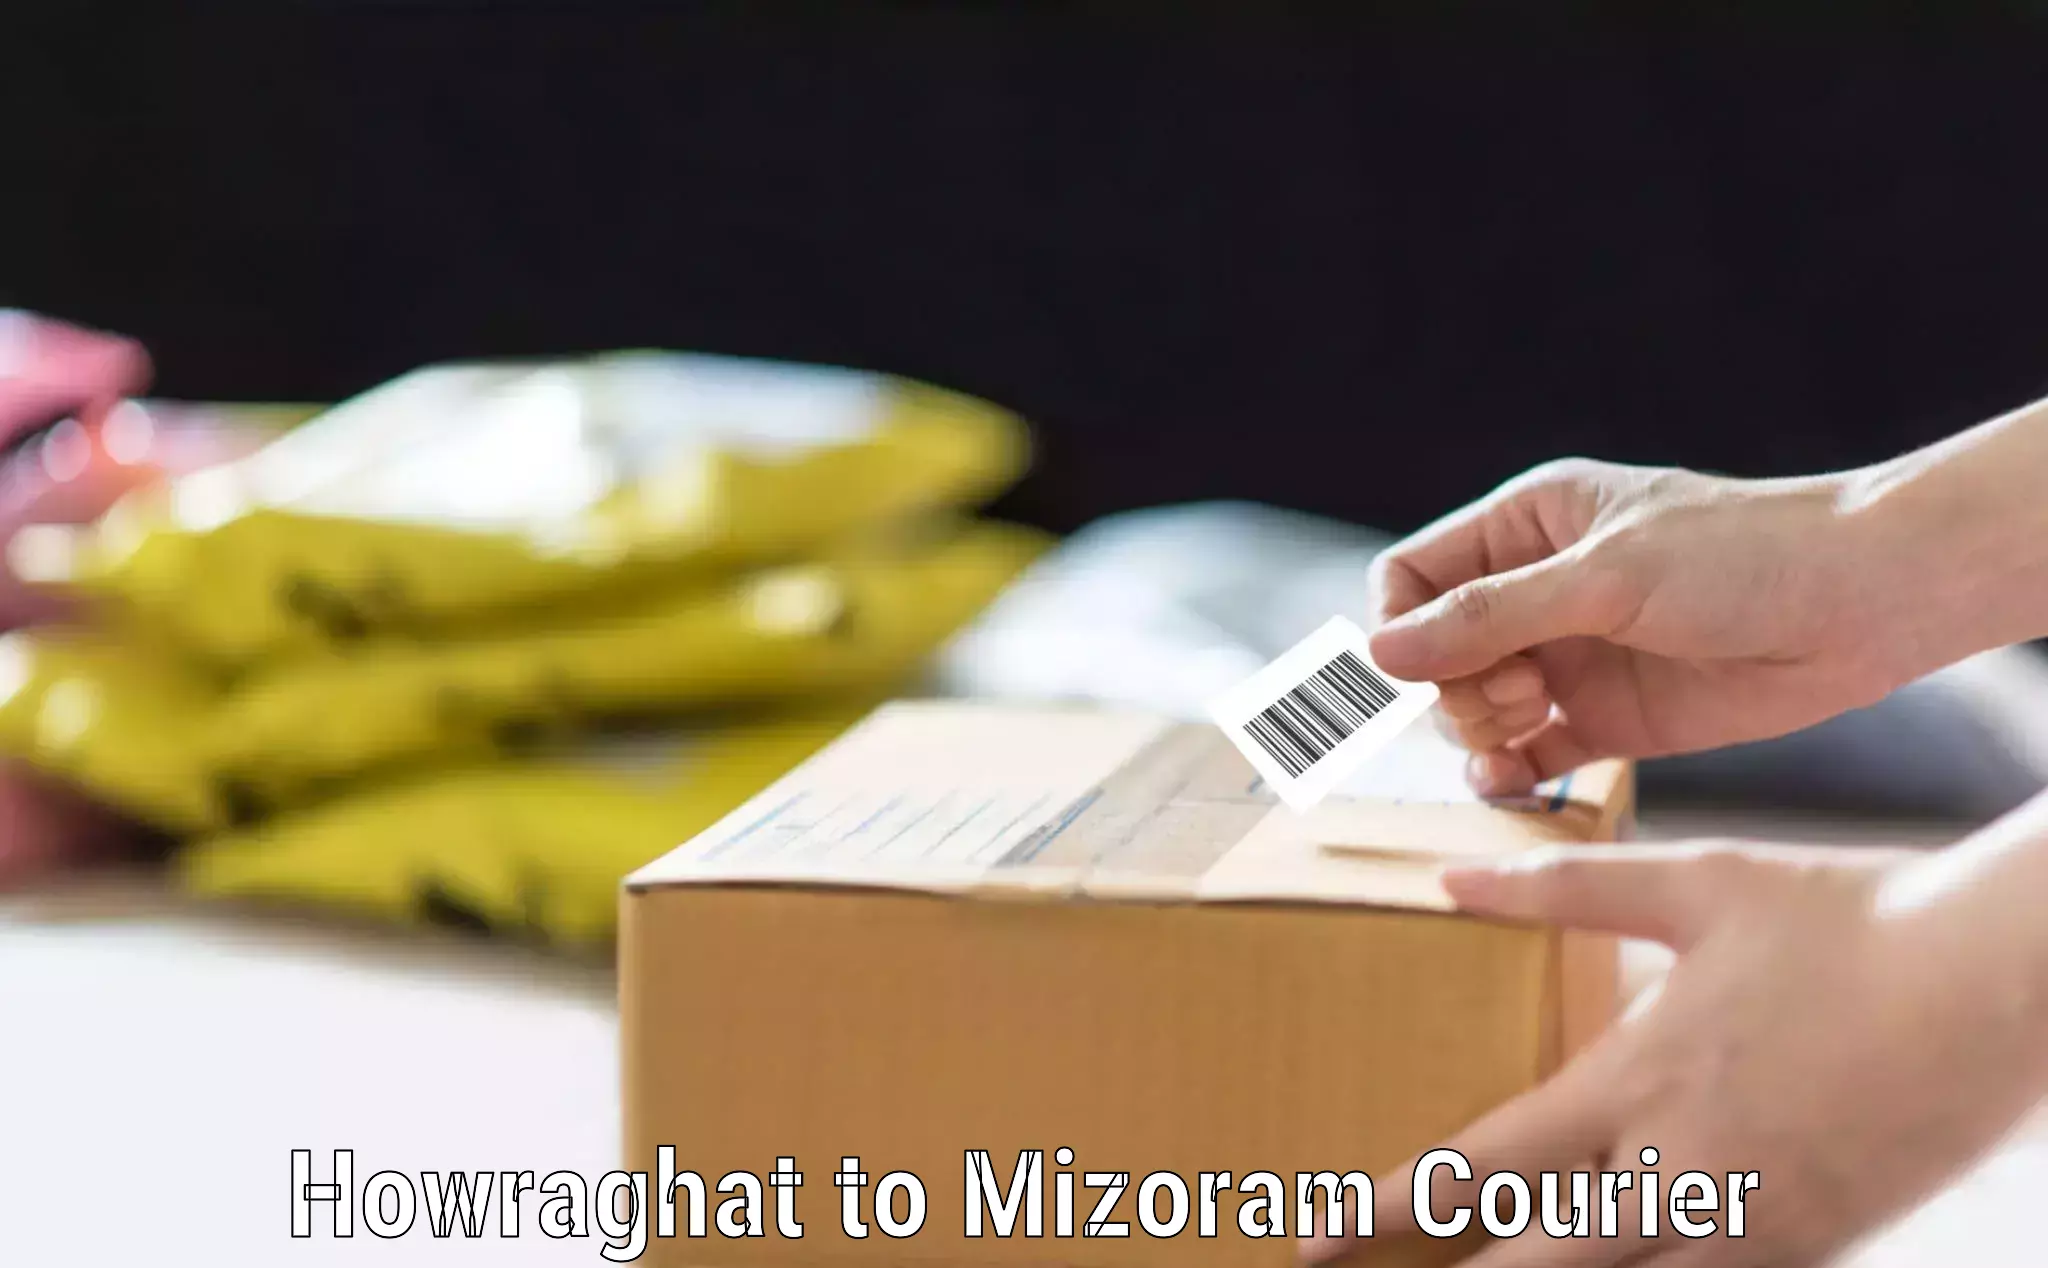 Luggage delivery logistics Howraghat to Mizoram